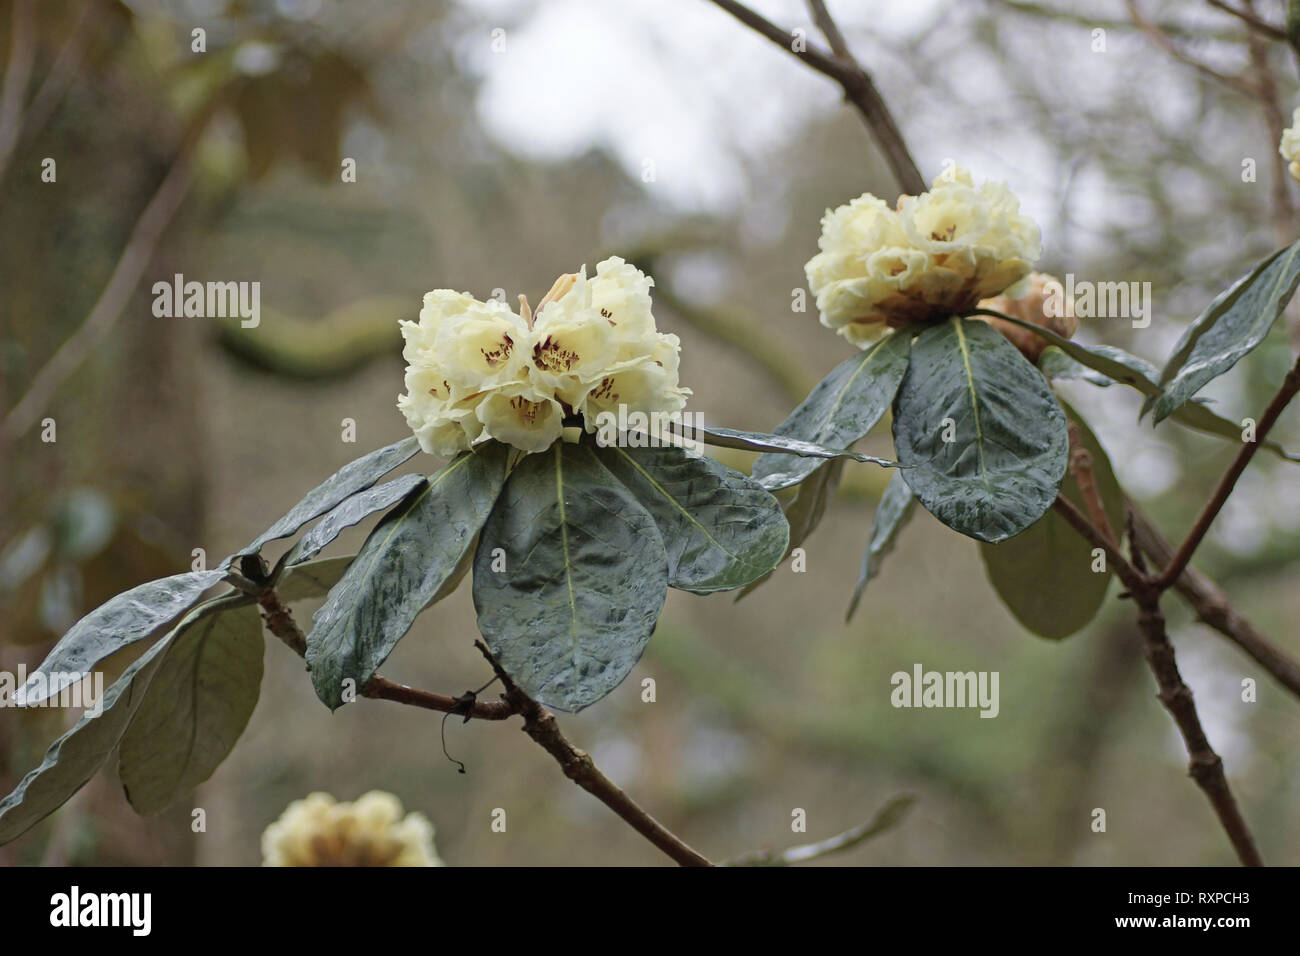 Rhododendron macabeanum at Clyne gardens, Swansea, Wales, UK. Stock Photo